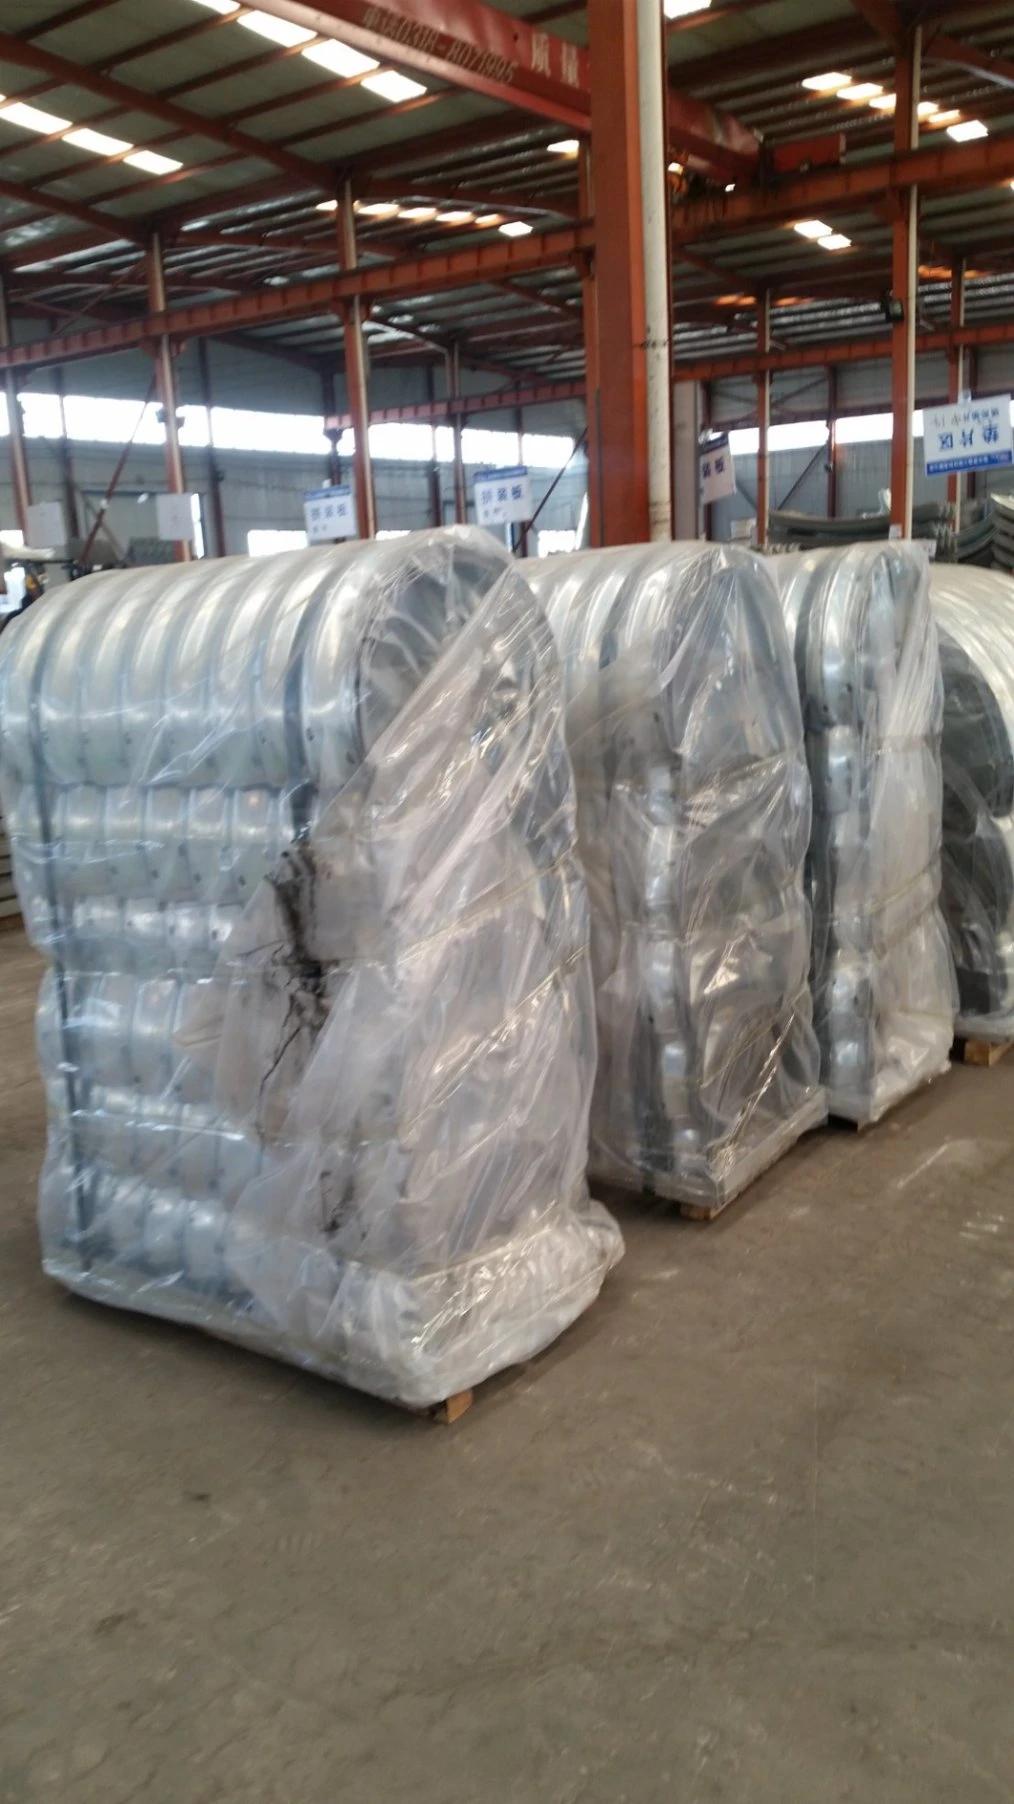 Factory Wholesales Prices Different Diameters Galvanized Corrugated Steel Culverts Steel Arch Culvert Pipes